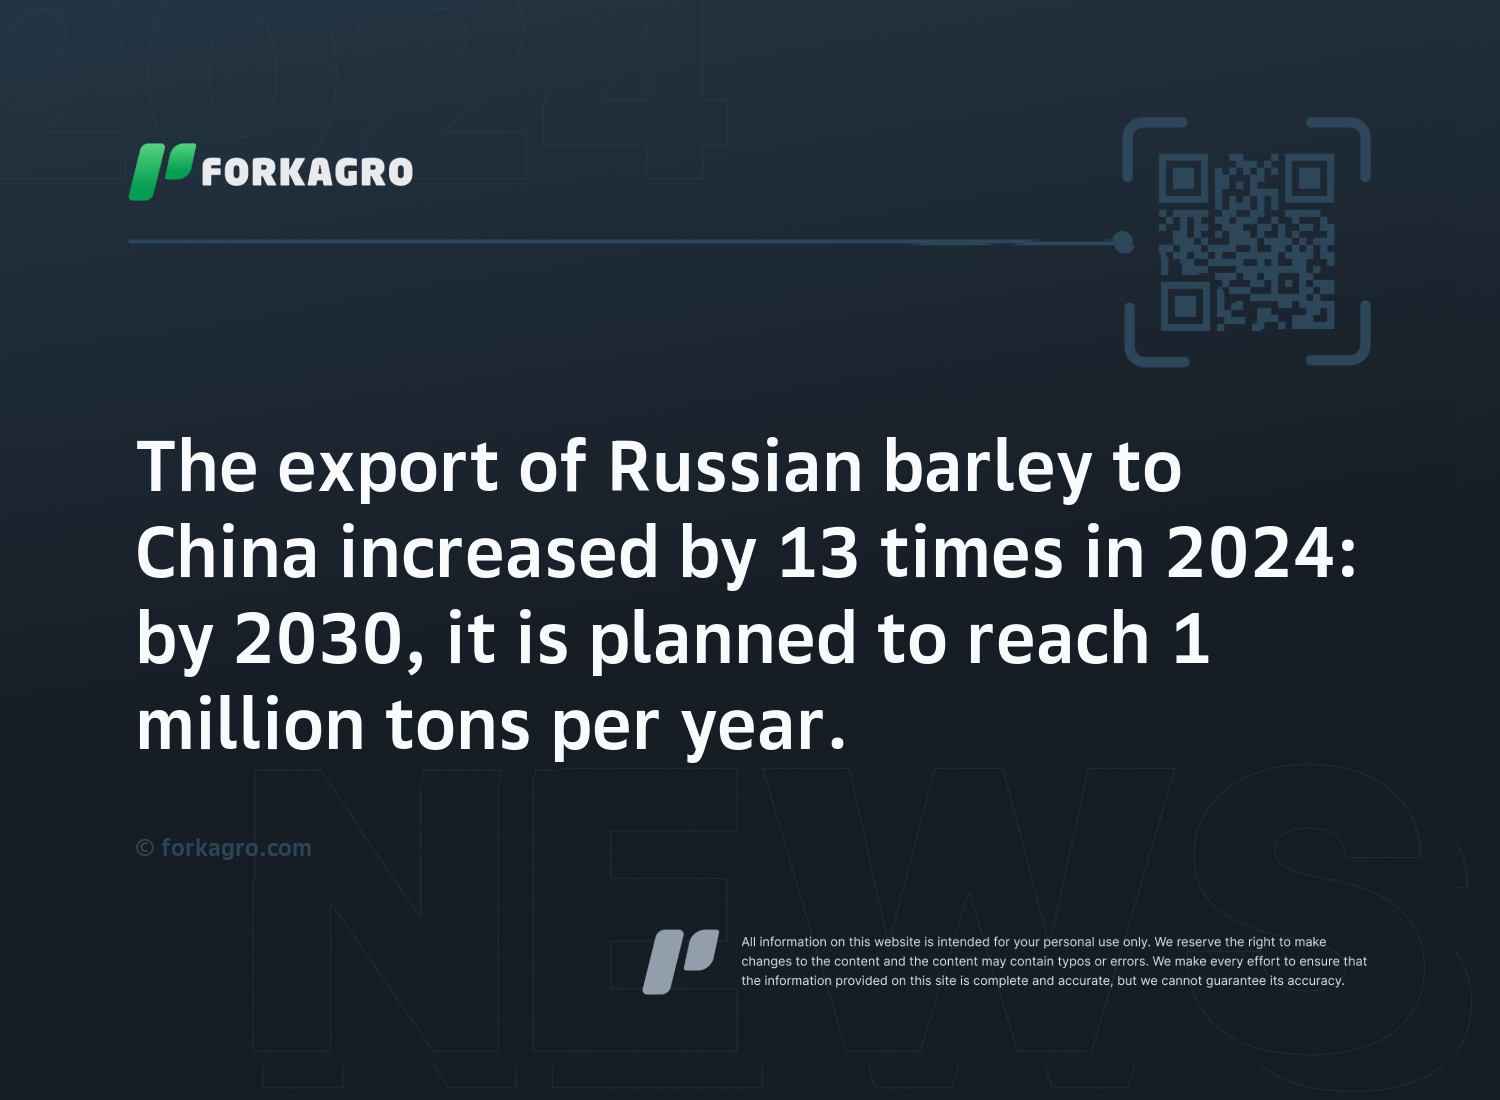 The export of Russian barley to China increased by 13 times in 2024: by 2030, it is planned to reach 1 million tons per year.